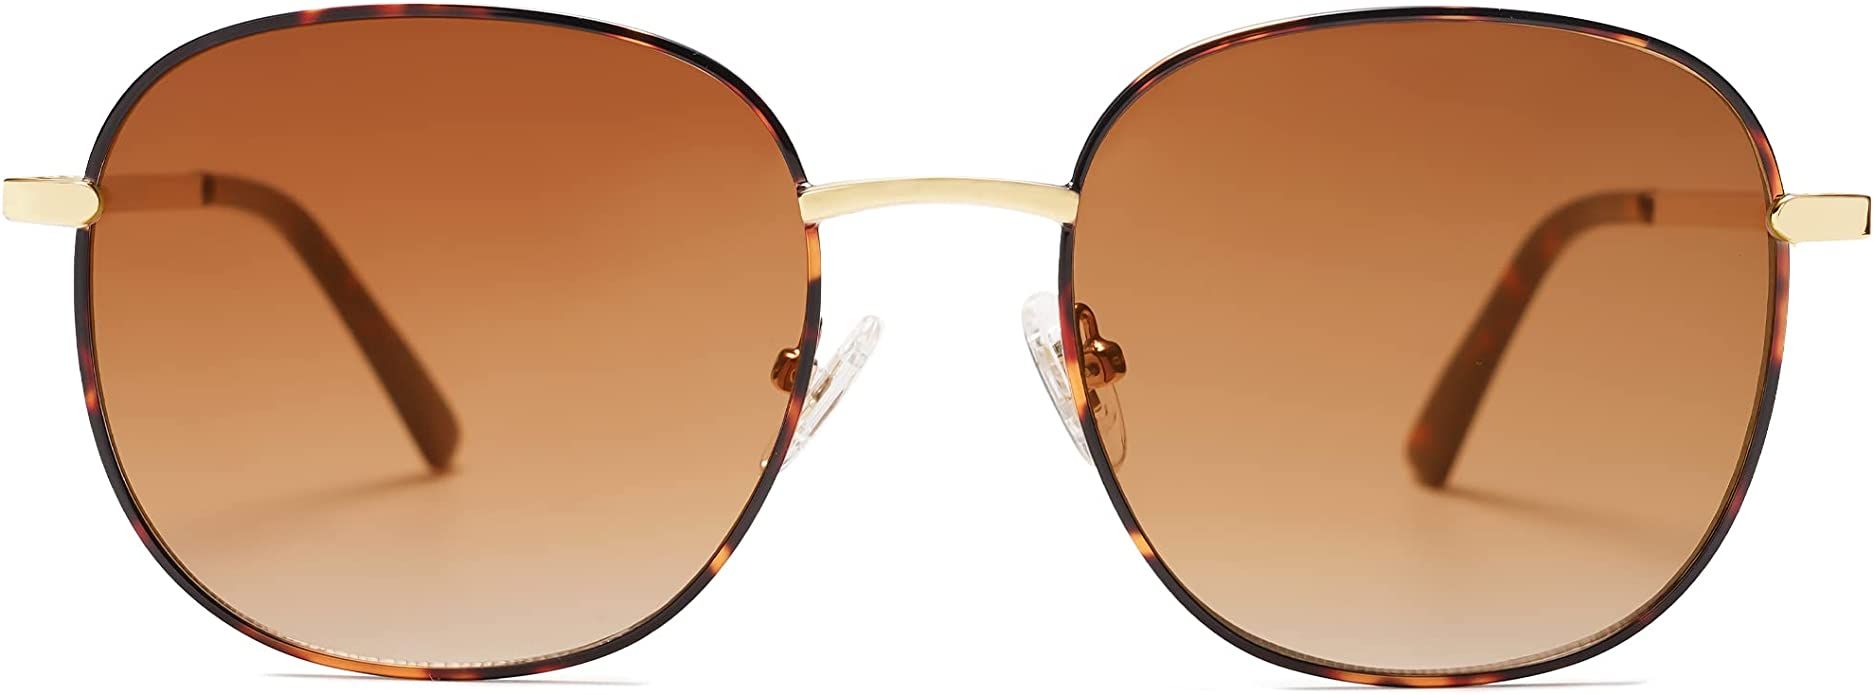 SOJOS Classic Square Sunglasses for Women Men with Spring Hinge Sunnies | Amazon (US)